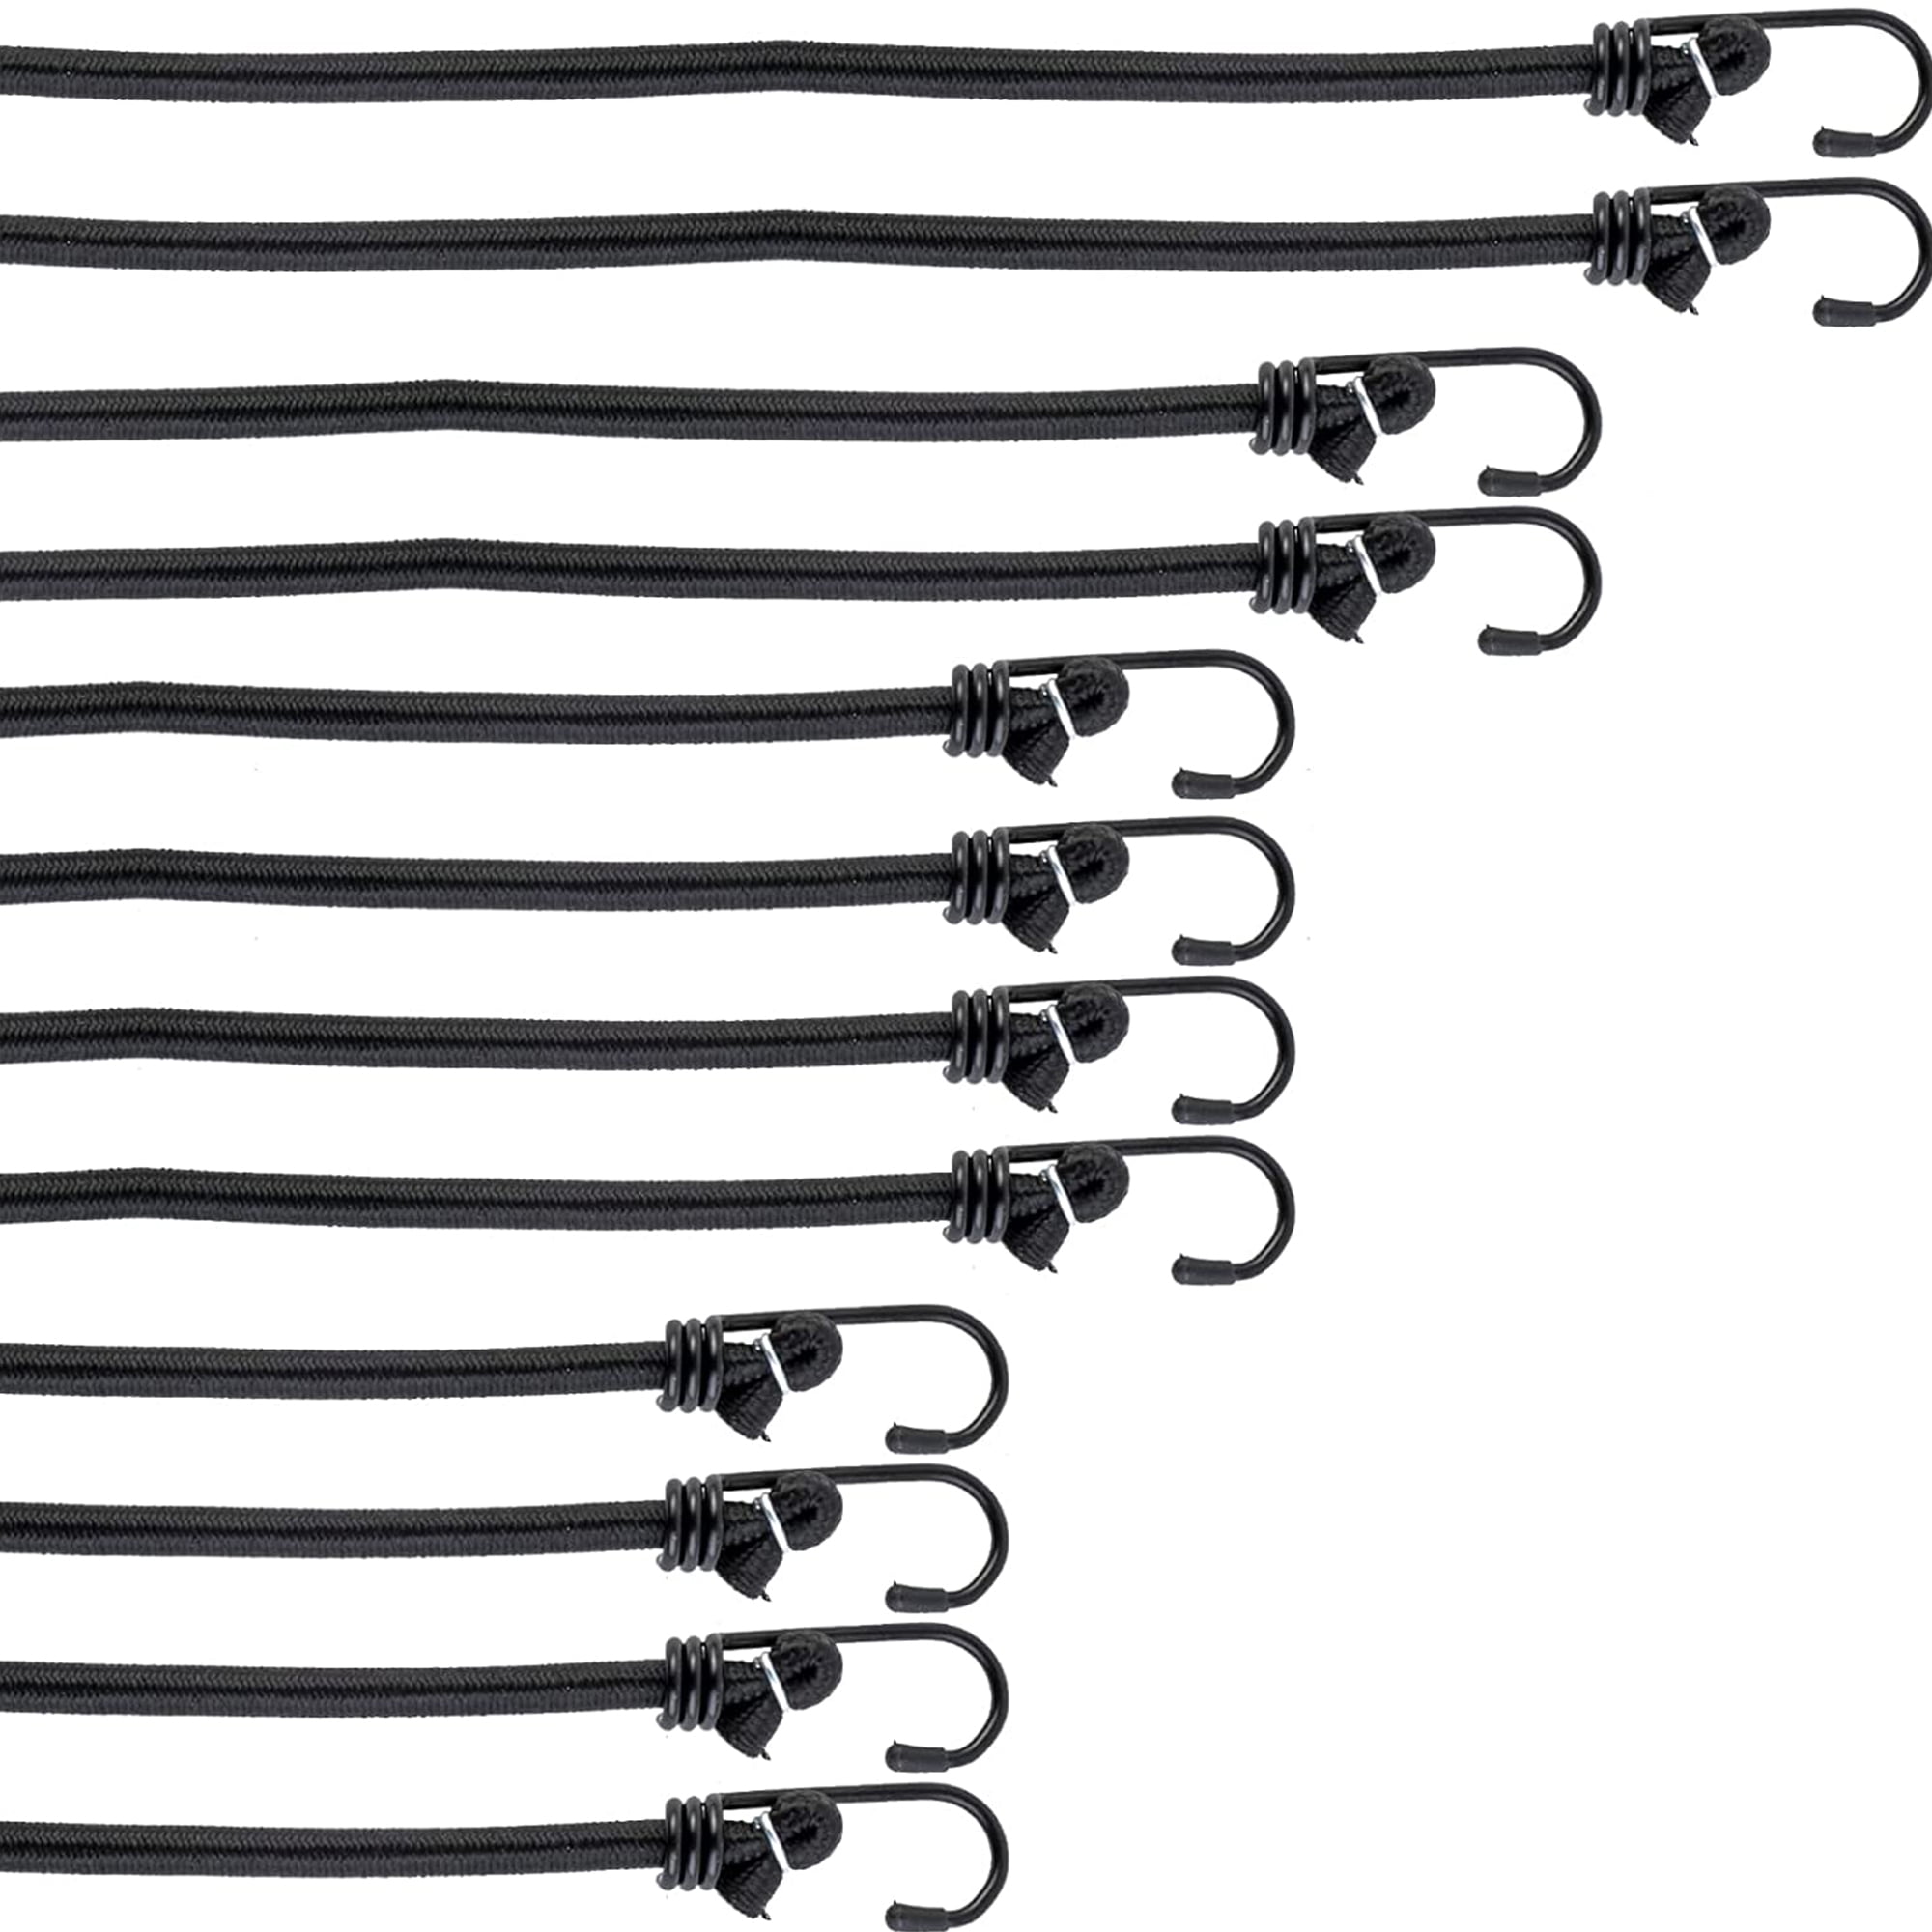 PRETEX Heavy Duty Bungee Cords Elastic Rope Straps with Hooks, Black 12 Pack